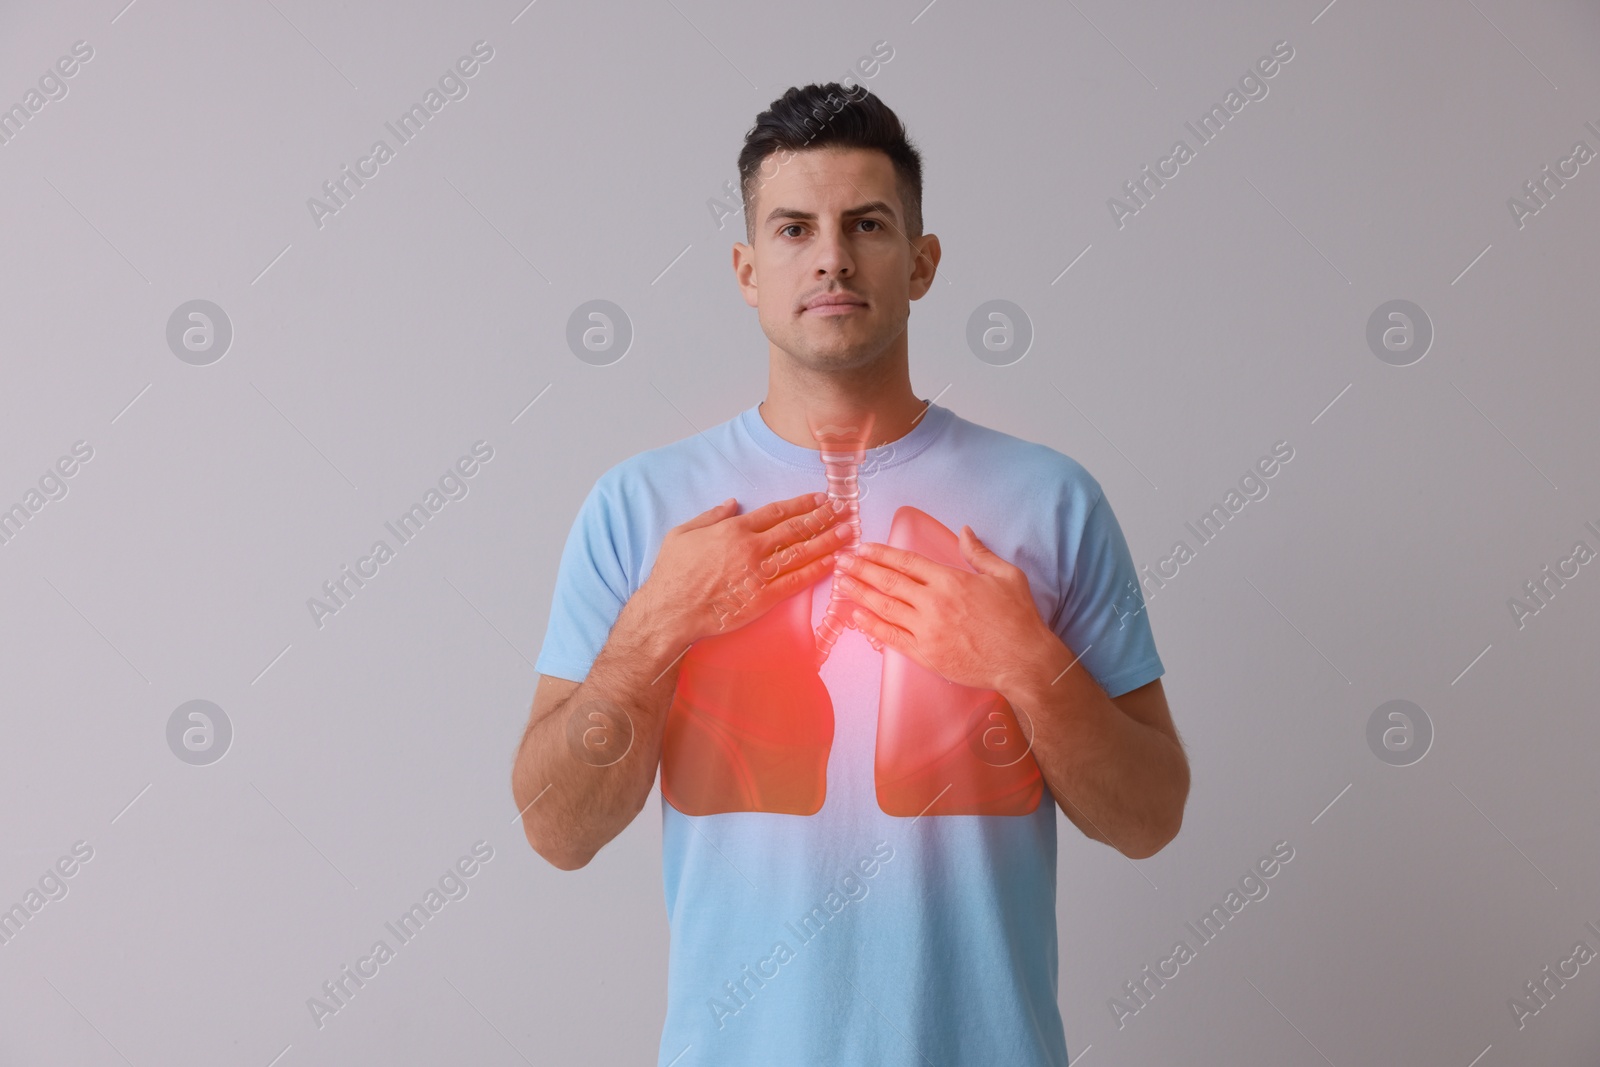 Image of Handsome man holding hands near chest with illustration of lungs on grey background